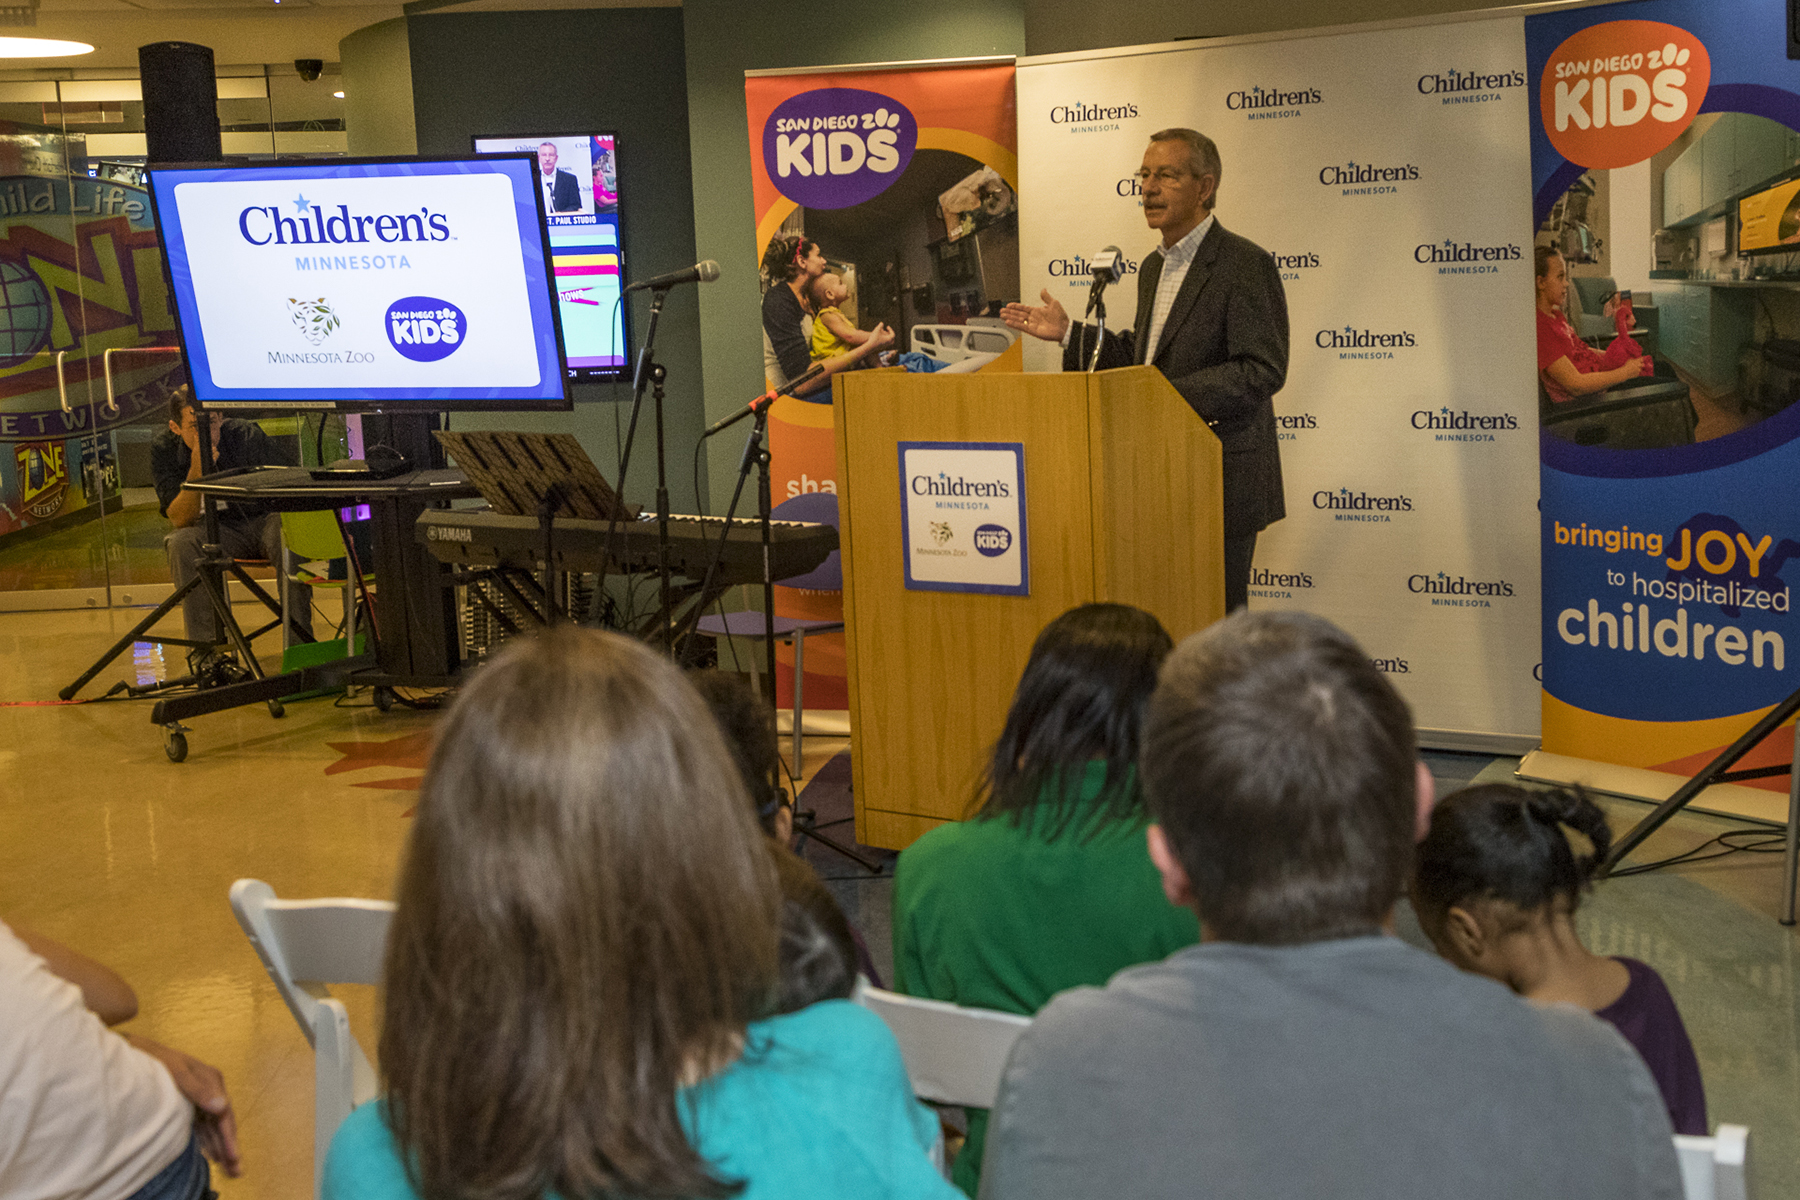 SDZG CEO/President Doug Myers speaks at the launch of the San Diego Zoo Kids channel at Children's Minnesota hospital.